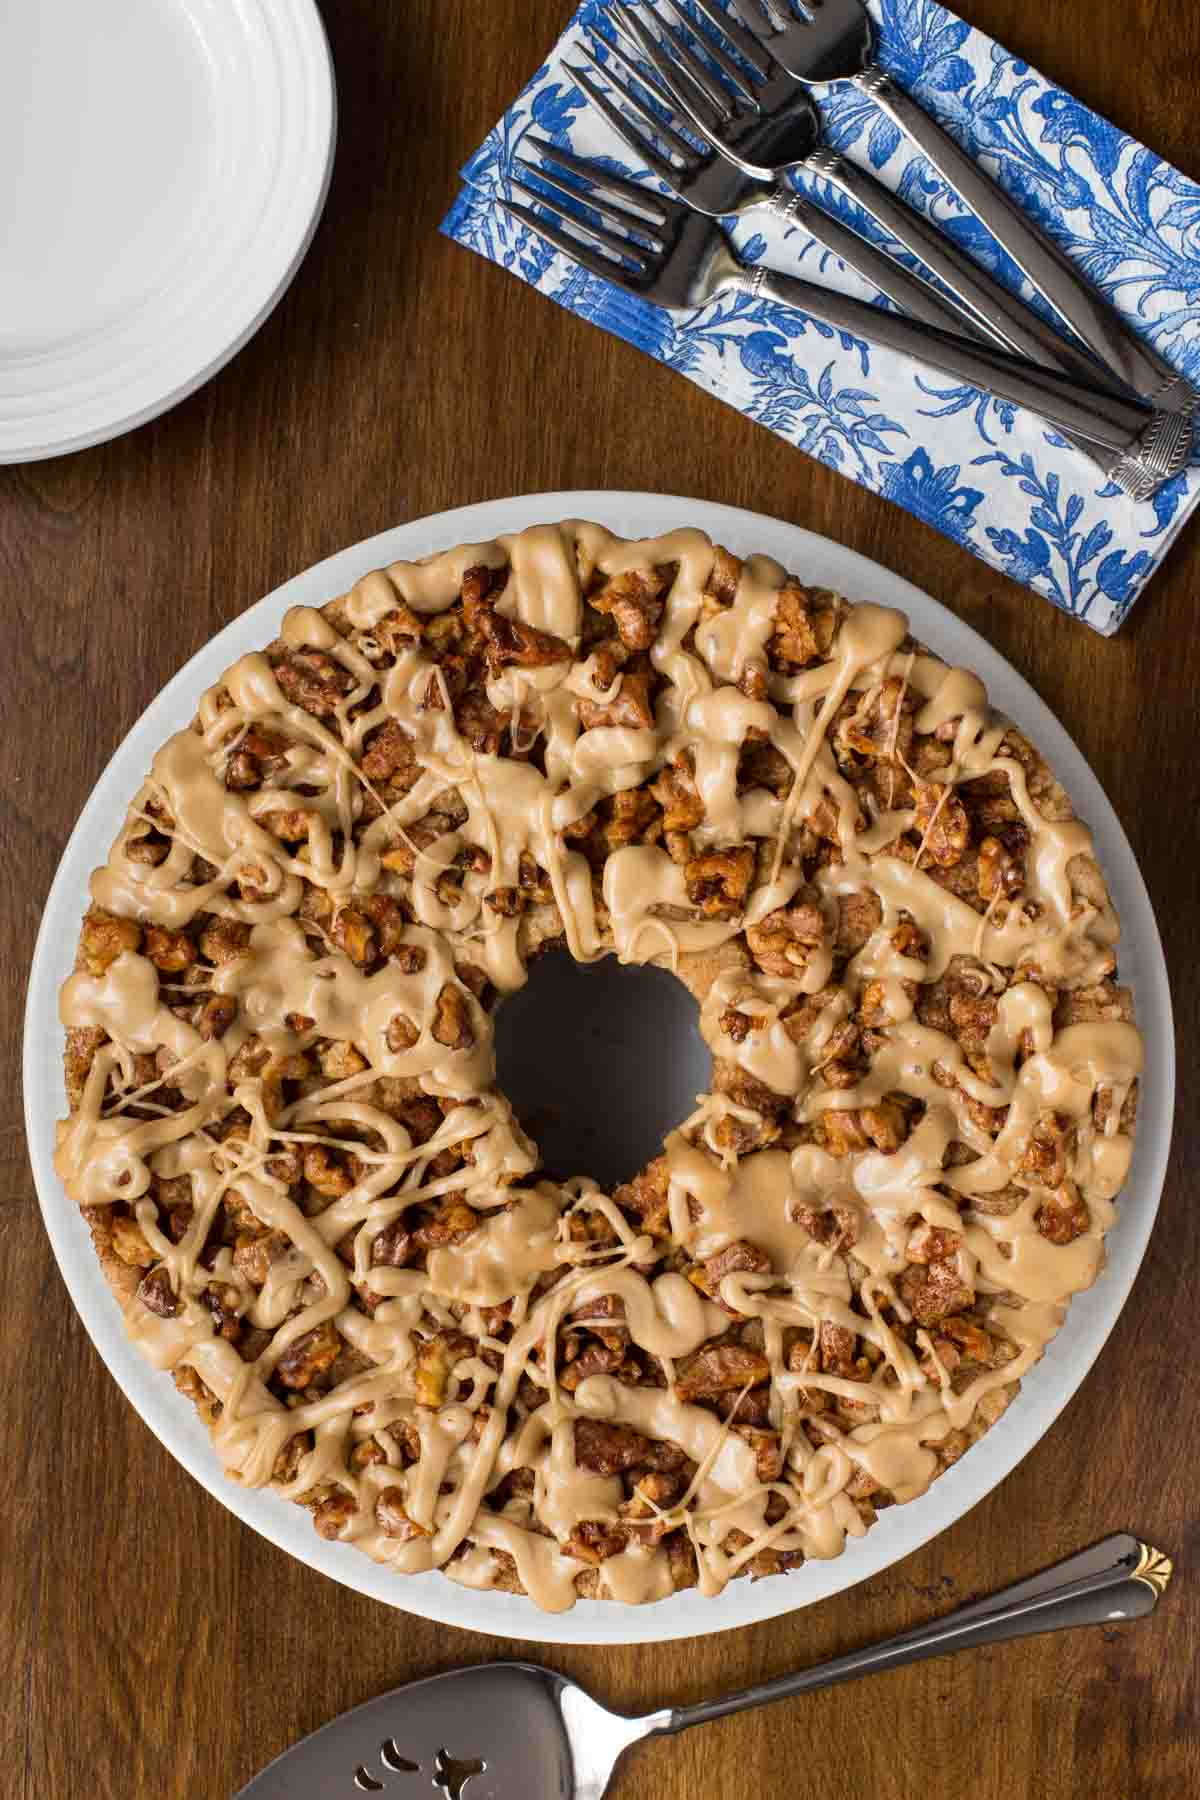 Overhead picture of Maple Walnut Banana Coffee Cake on a white plate with blue and white napkins